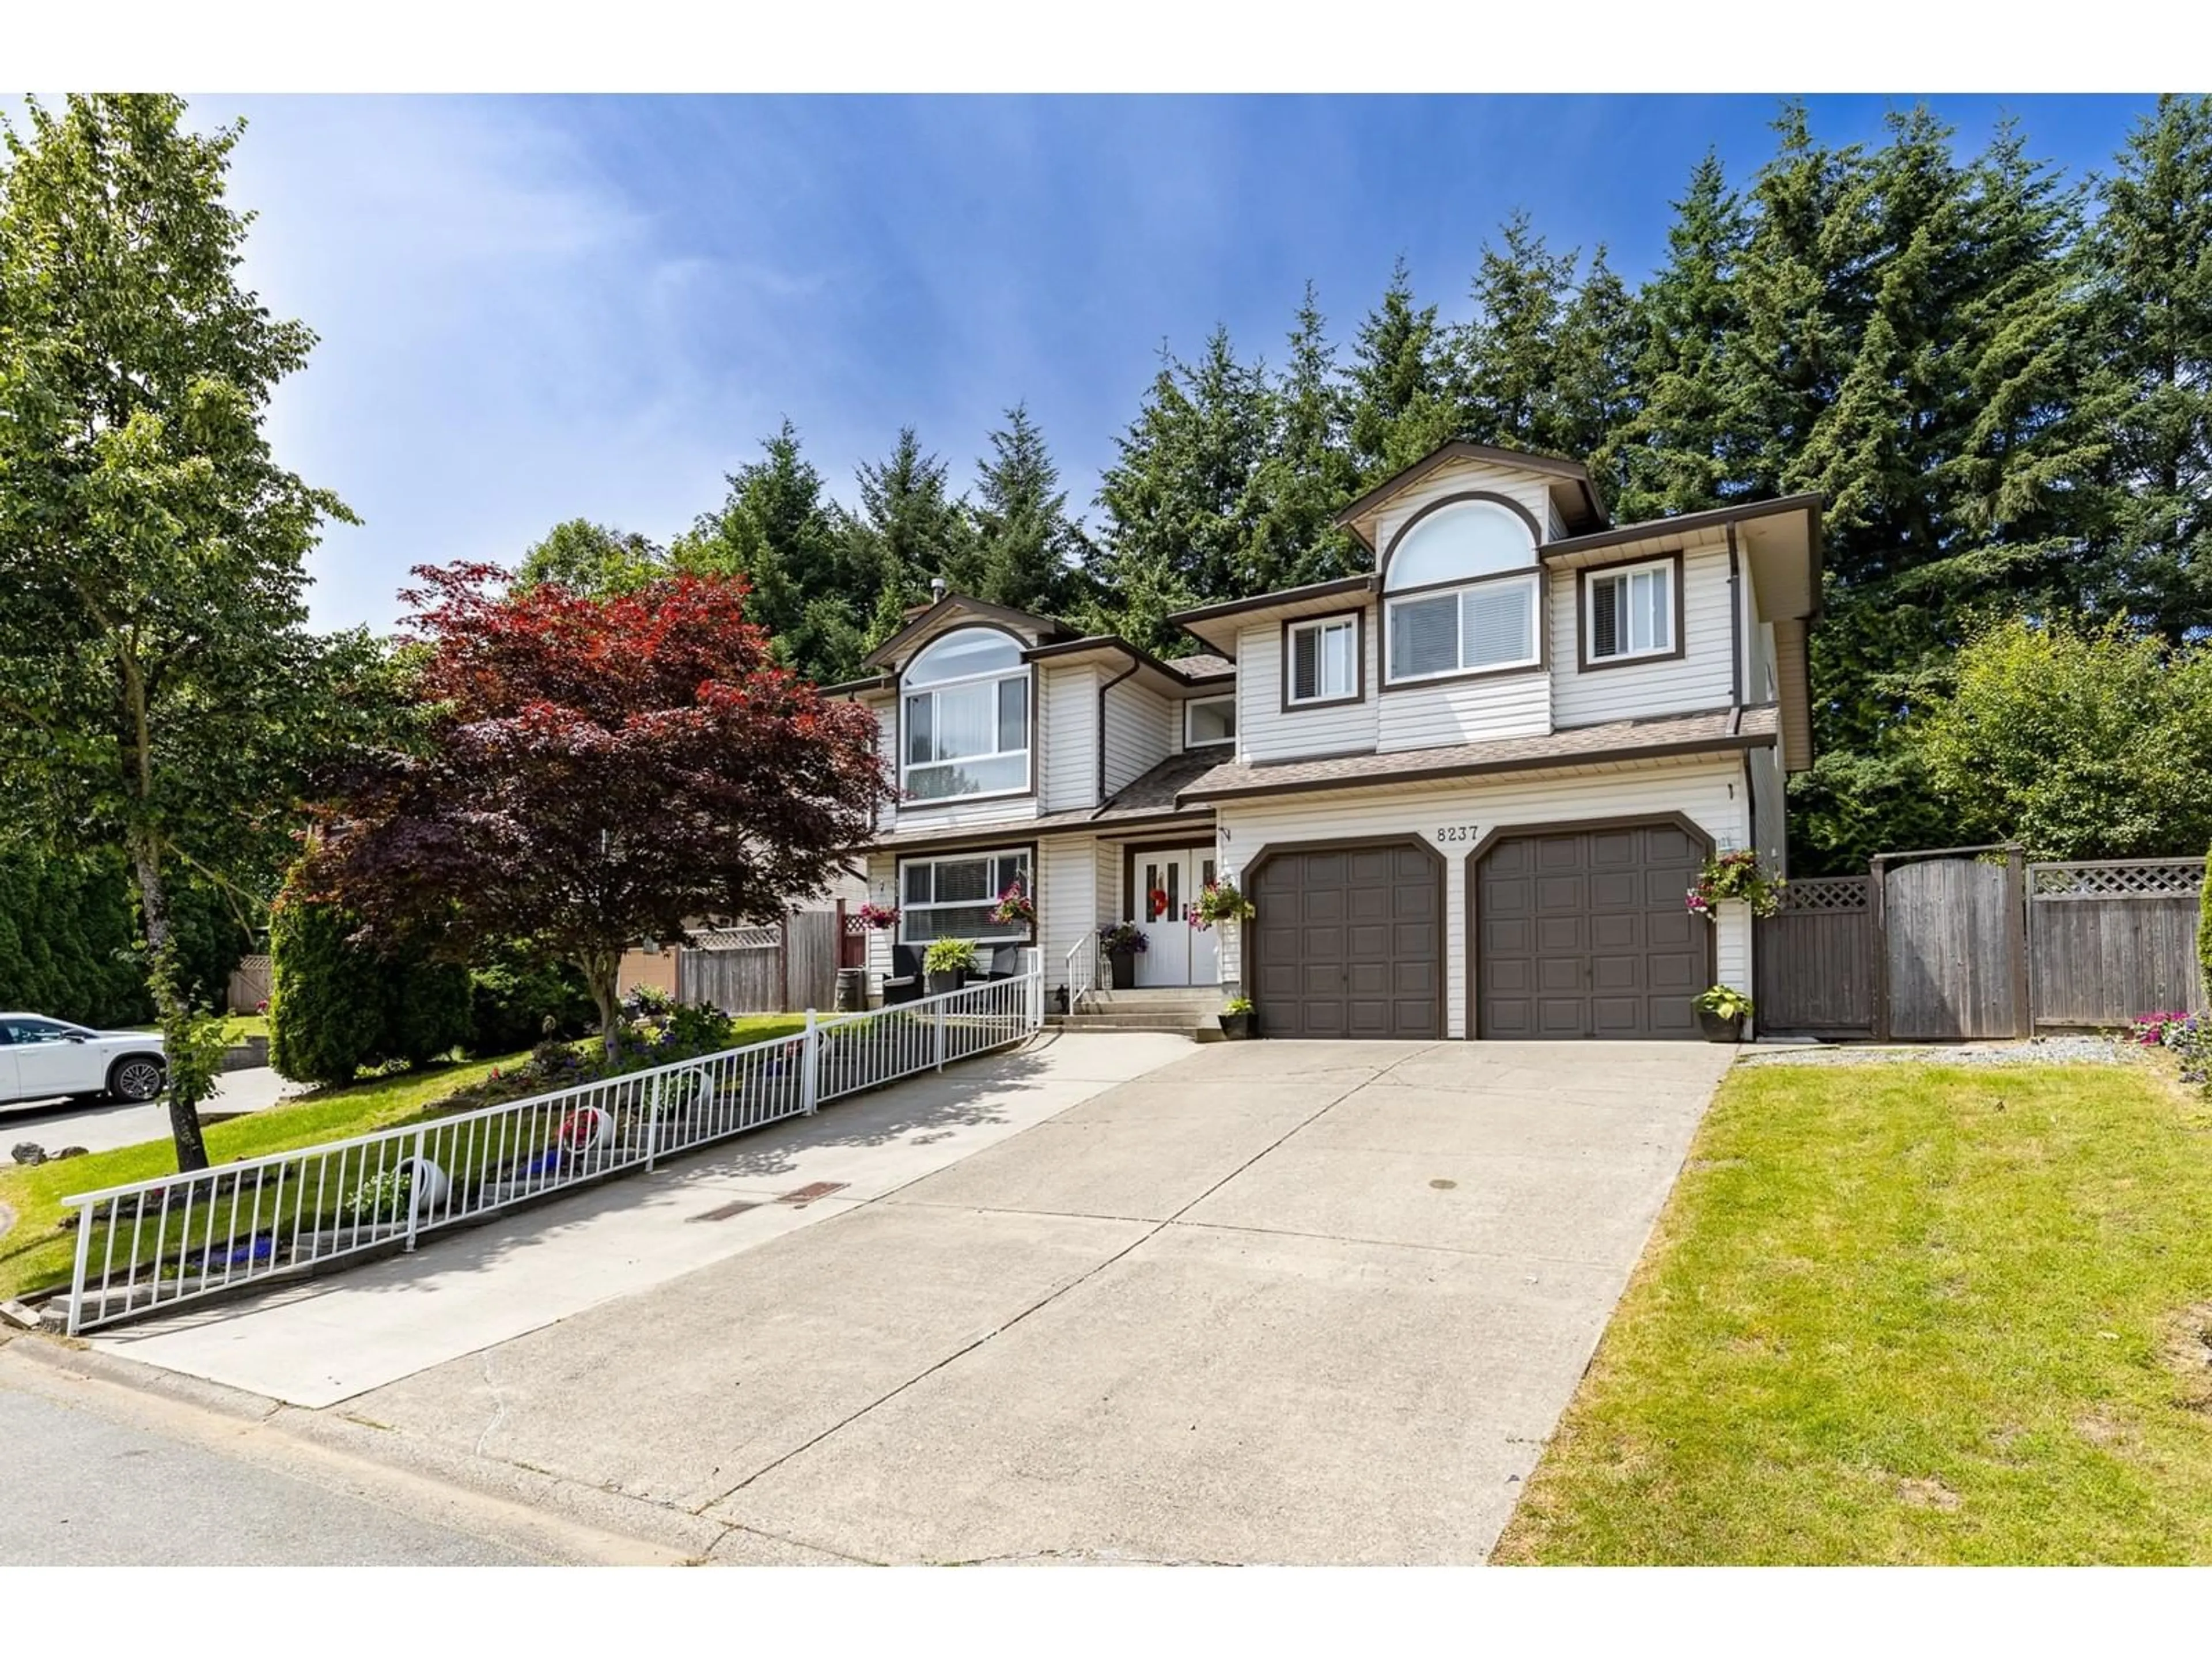 Frontside or backside of a home for 8237 167A STREET, Surrey British Columbia V4N3H5